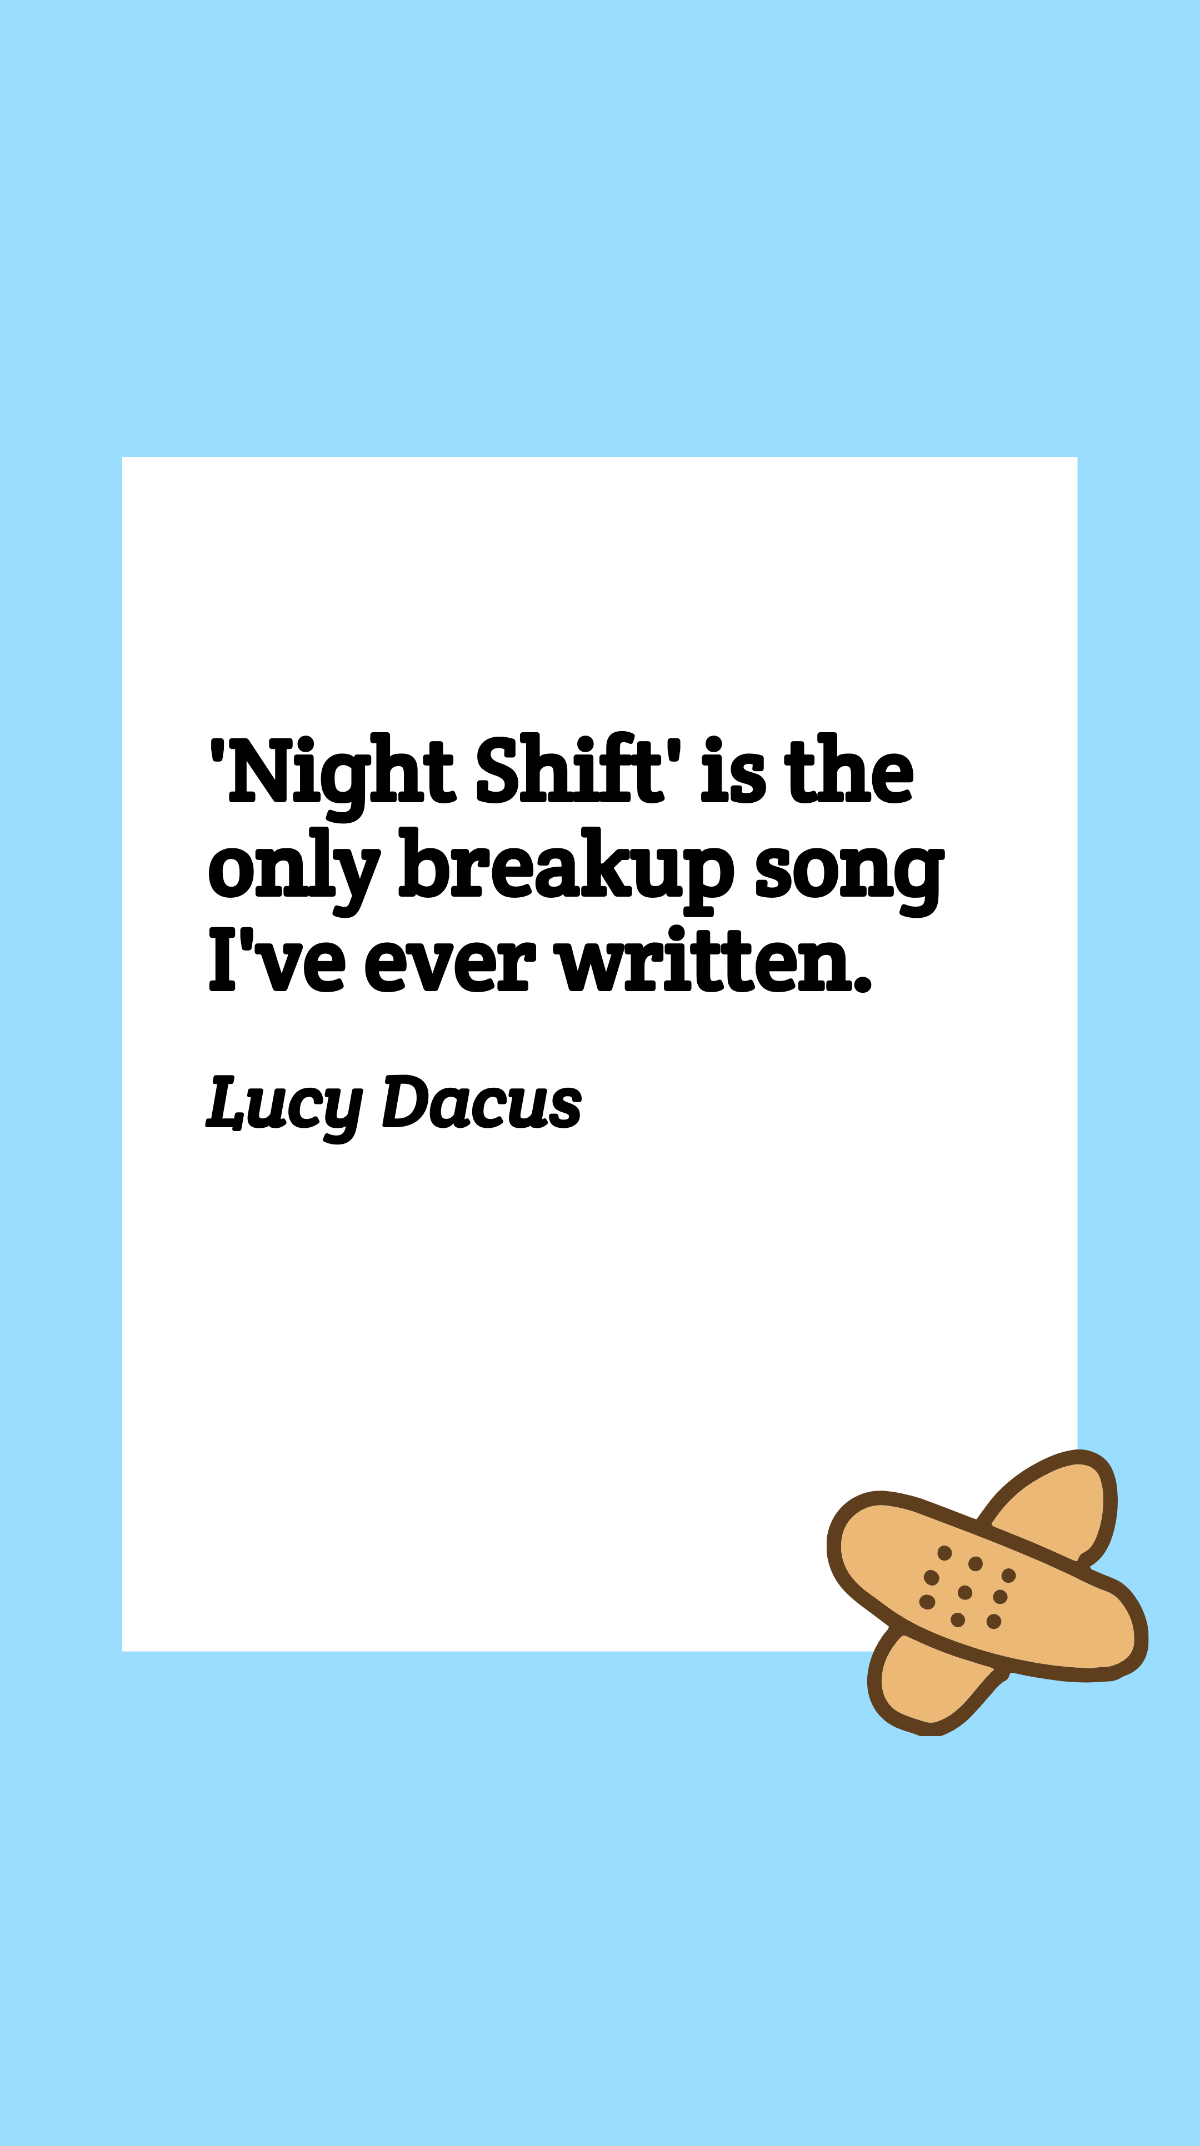 Lucy Dacus - 'Night Shift' is the only breakup song I've ever written. Template